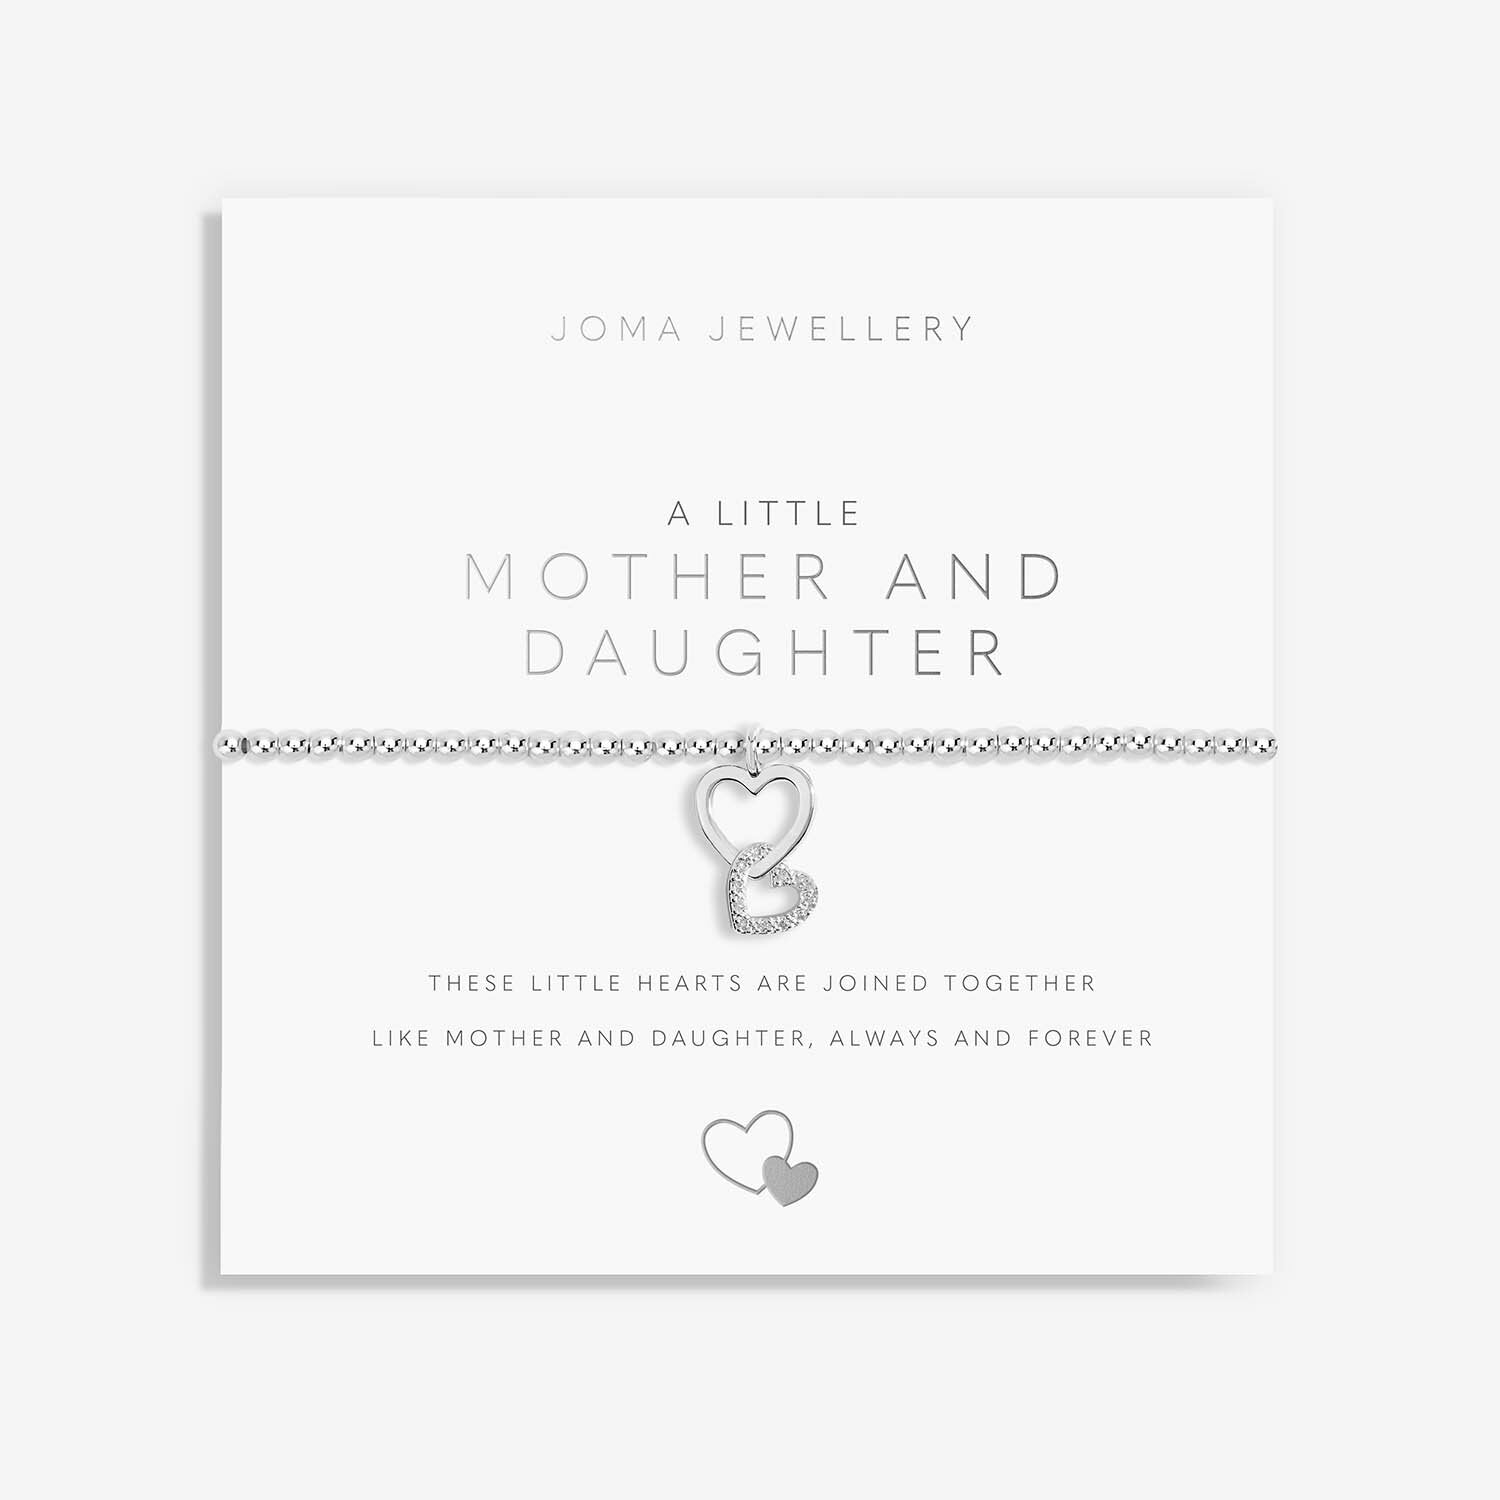 A Little Mother And Daughter Bracelet - Joma Jewellery